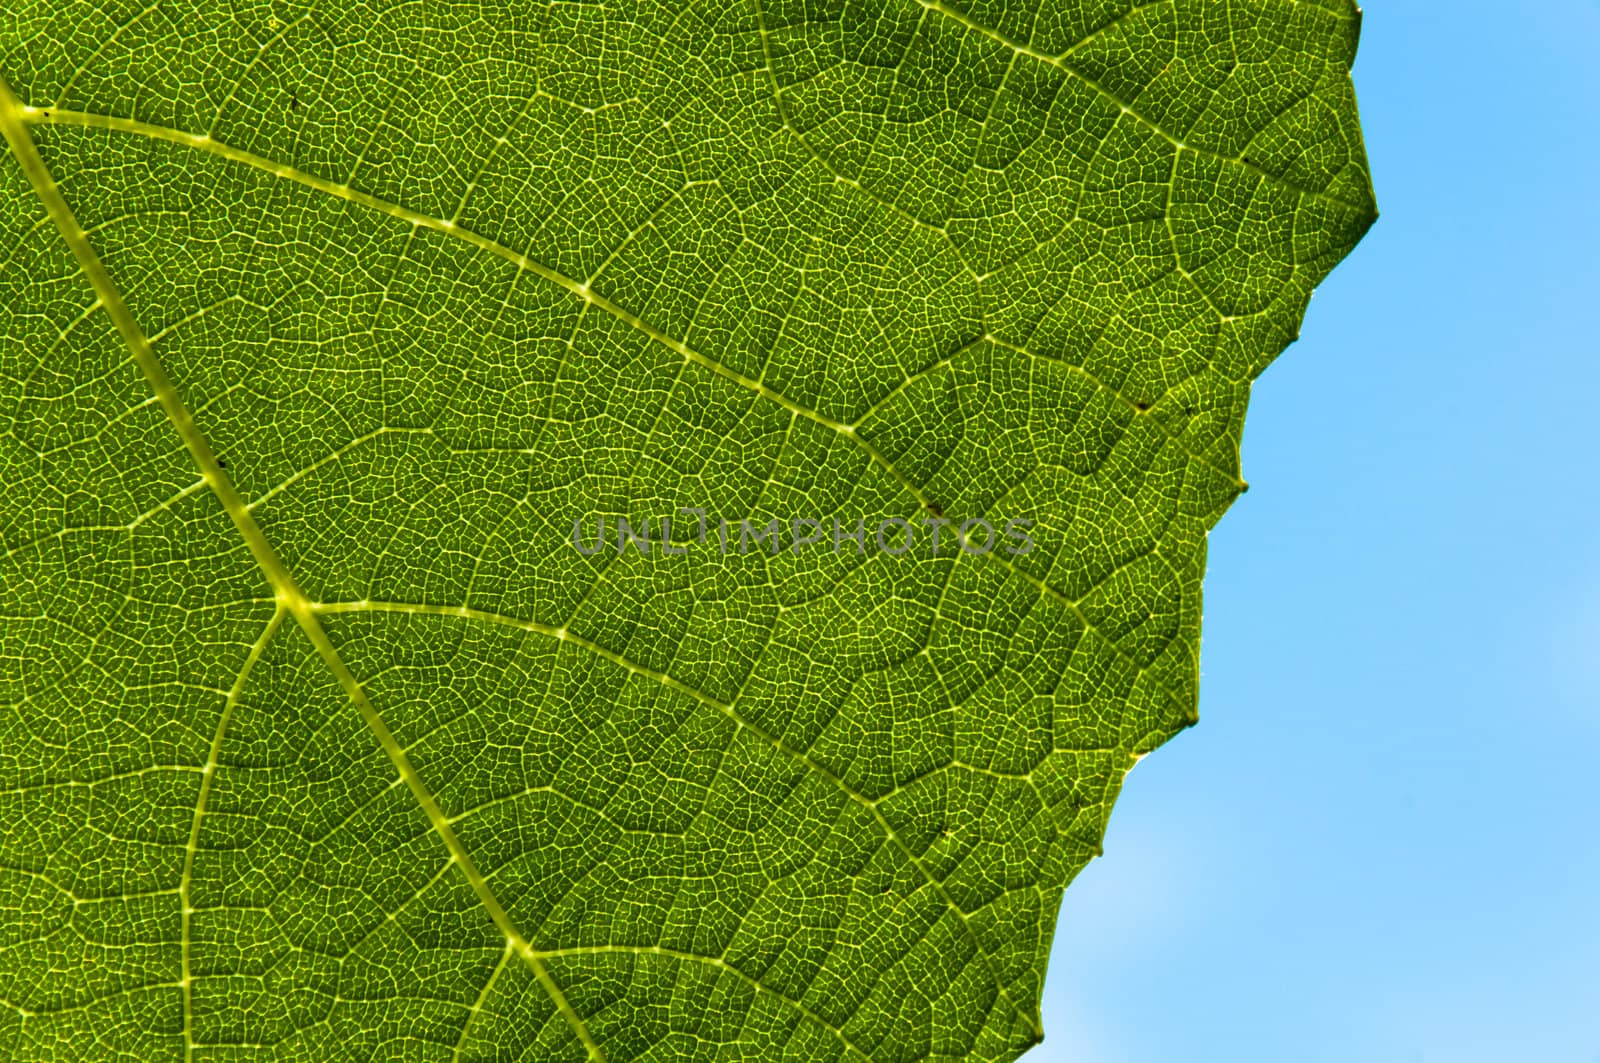 Grape leaf textured part at back view and outdoors